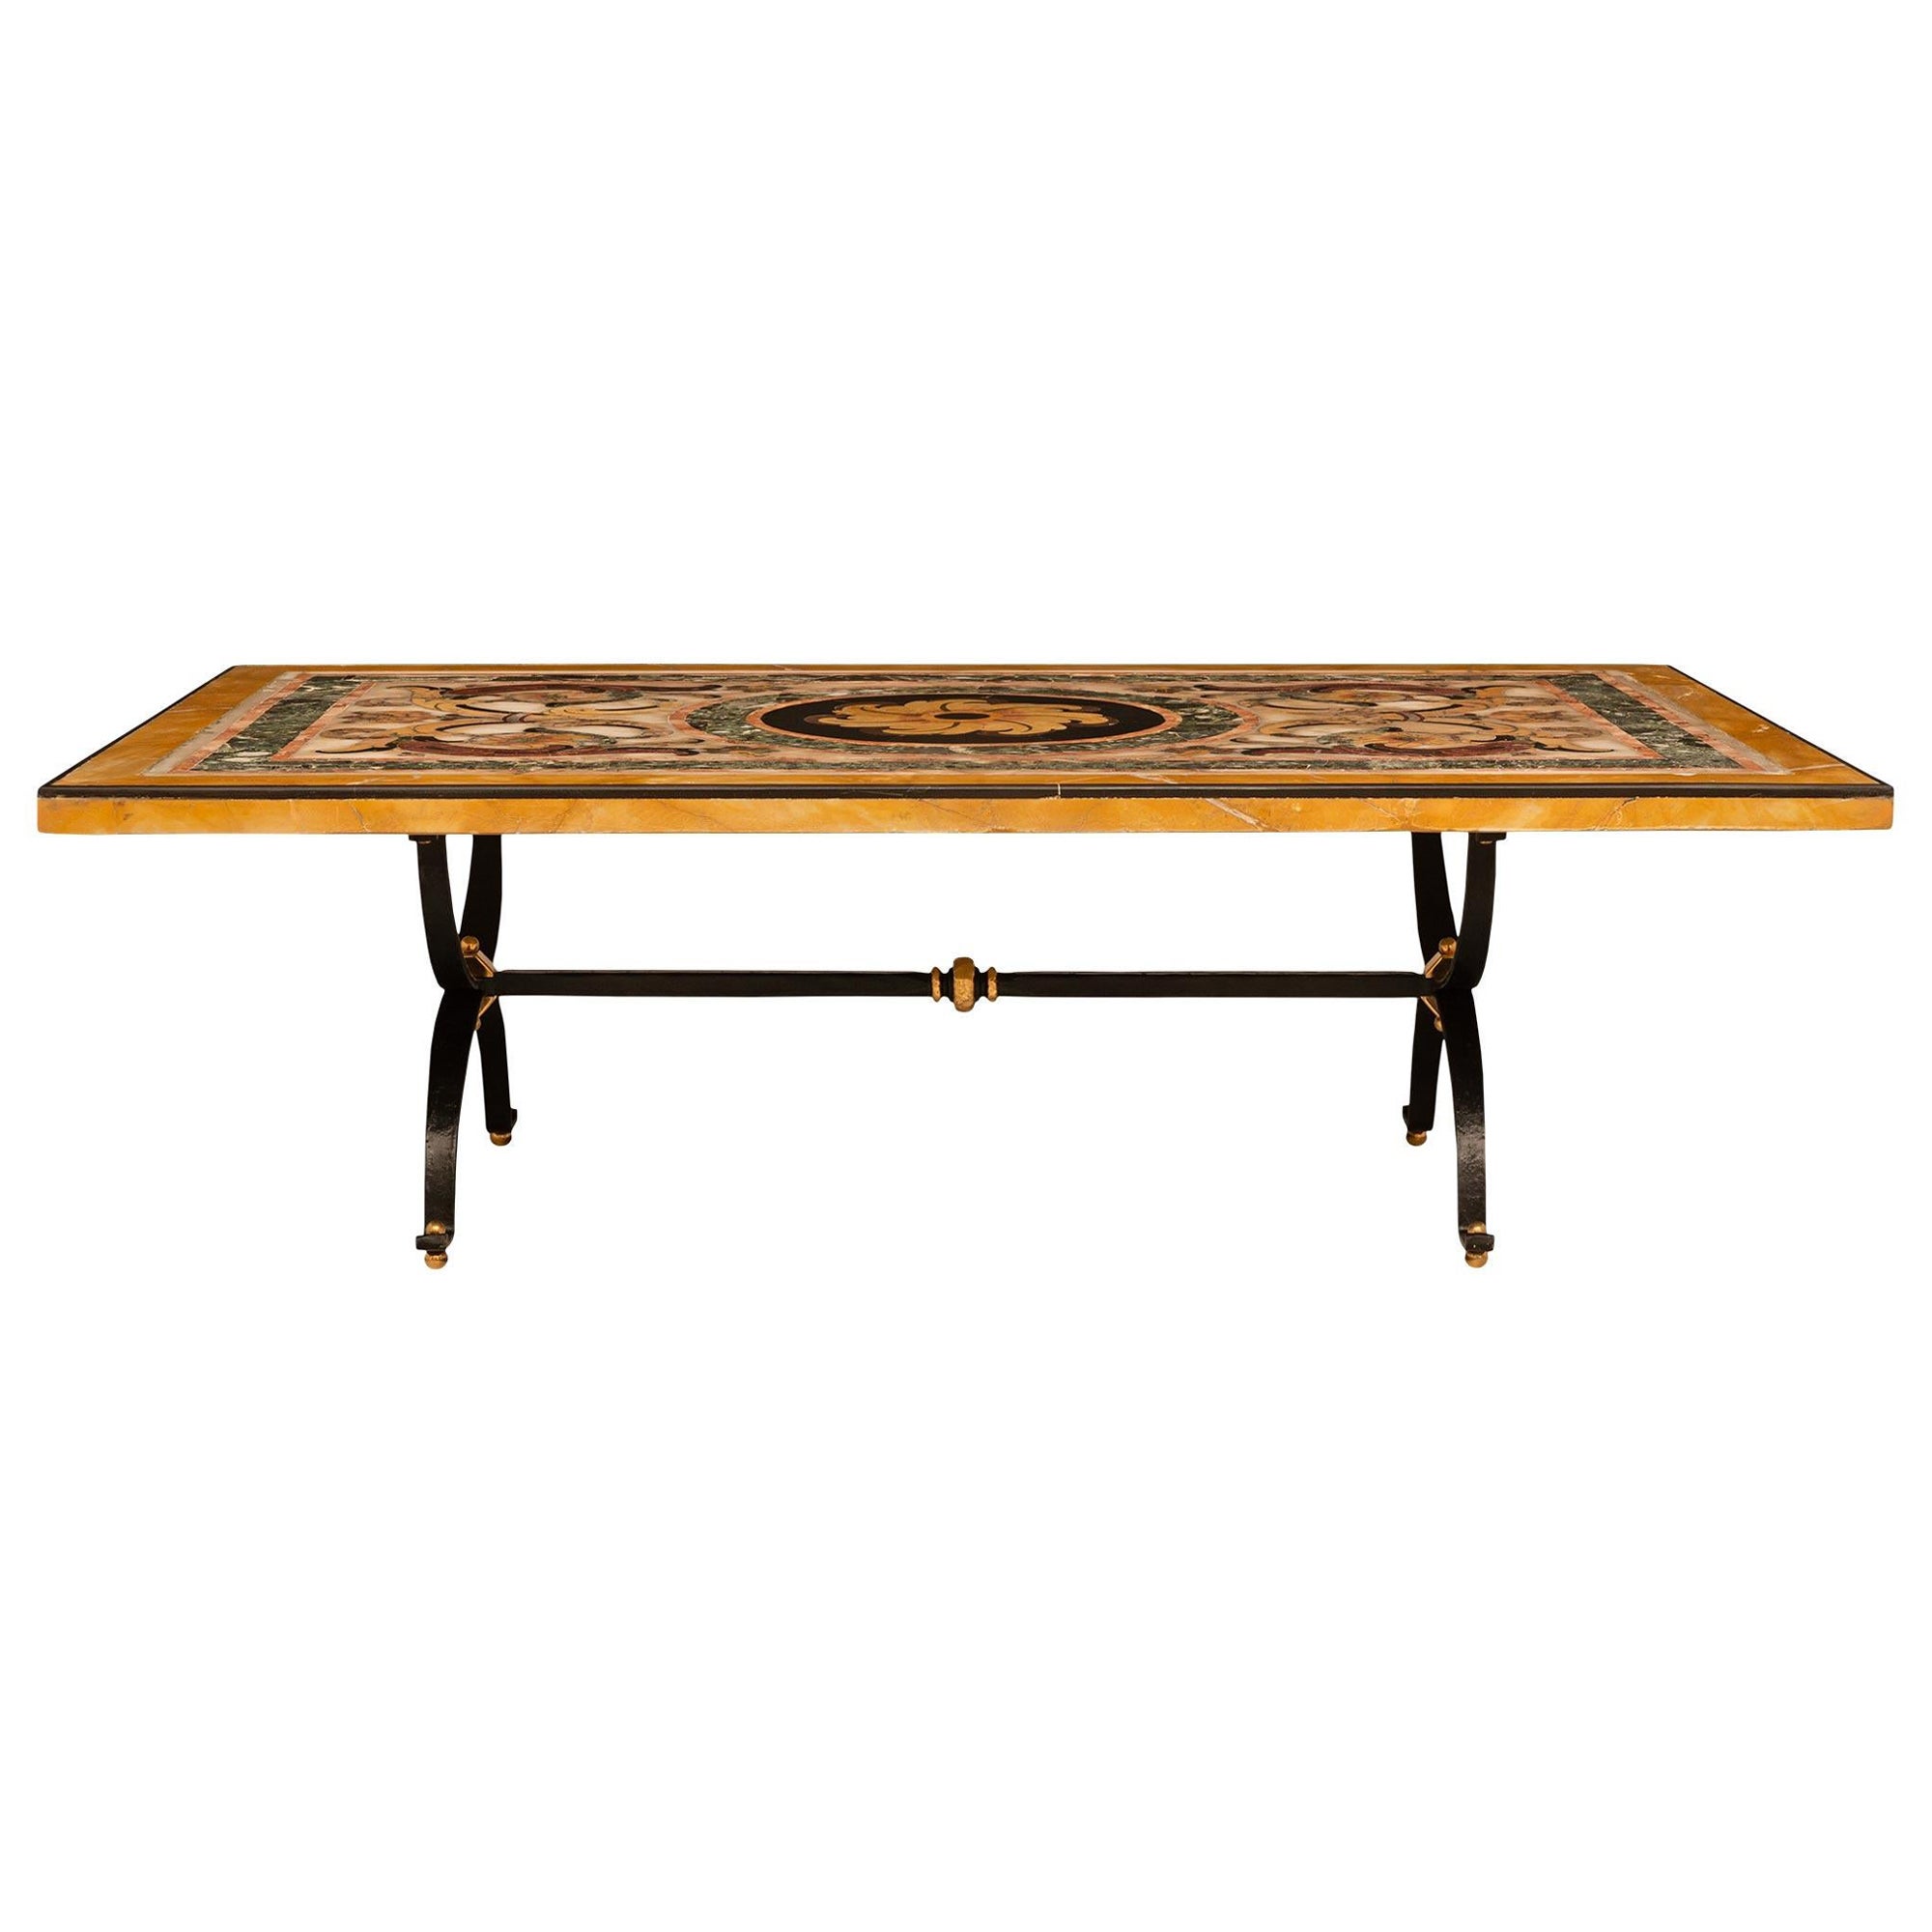 Italian 18th Century Pietra Dura Marble, Wrought Iron And Brass Coffee Table For Sale